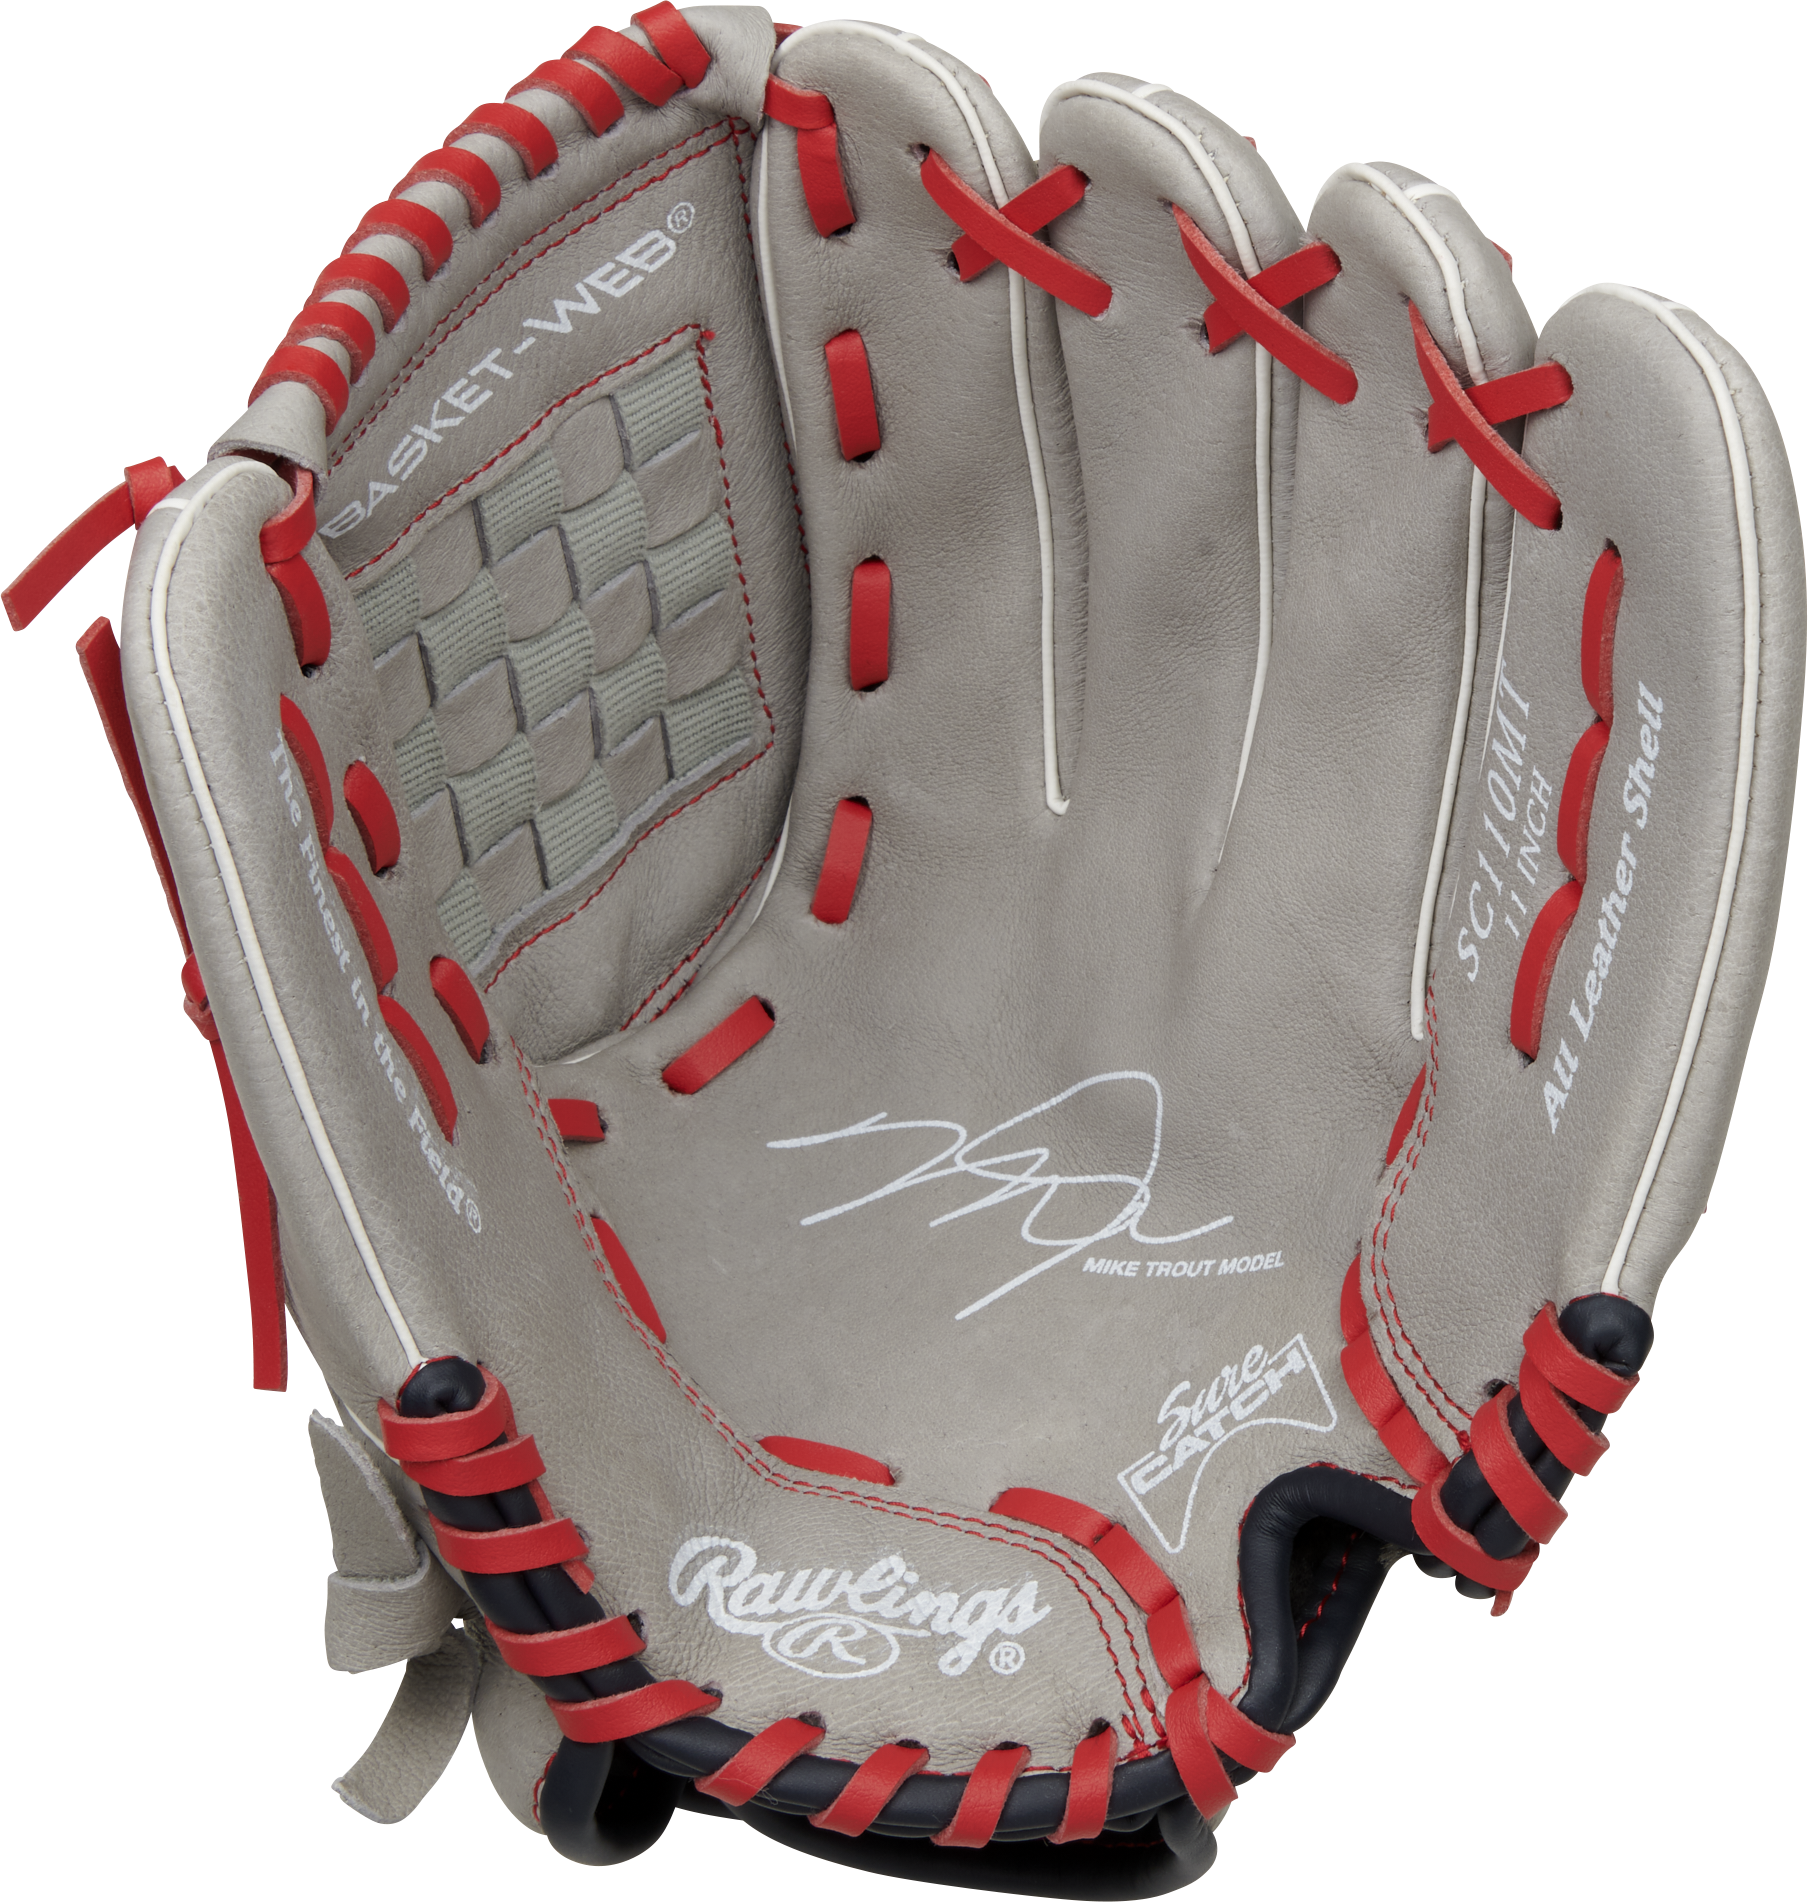 Rawlings Sure Catch Mike Trout Signature 11 Youth Baseball Mitt - SC110MT  - Bagger Sports